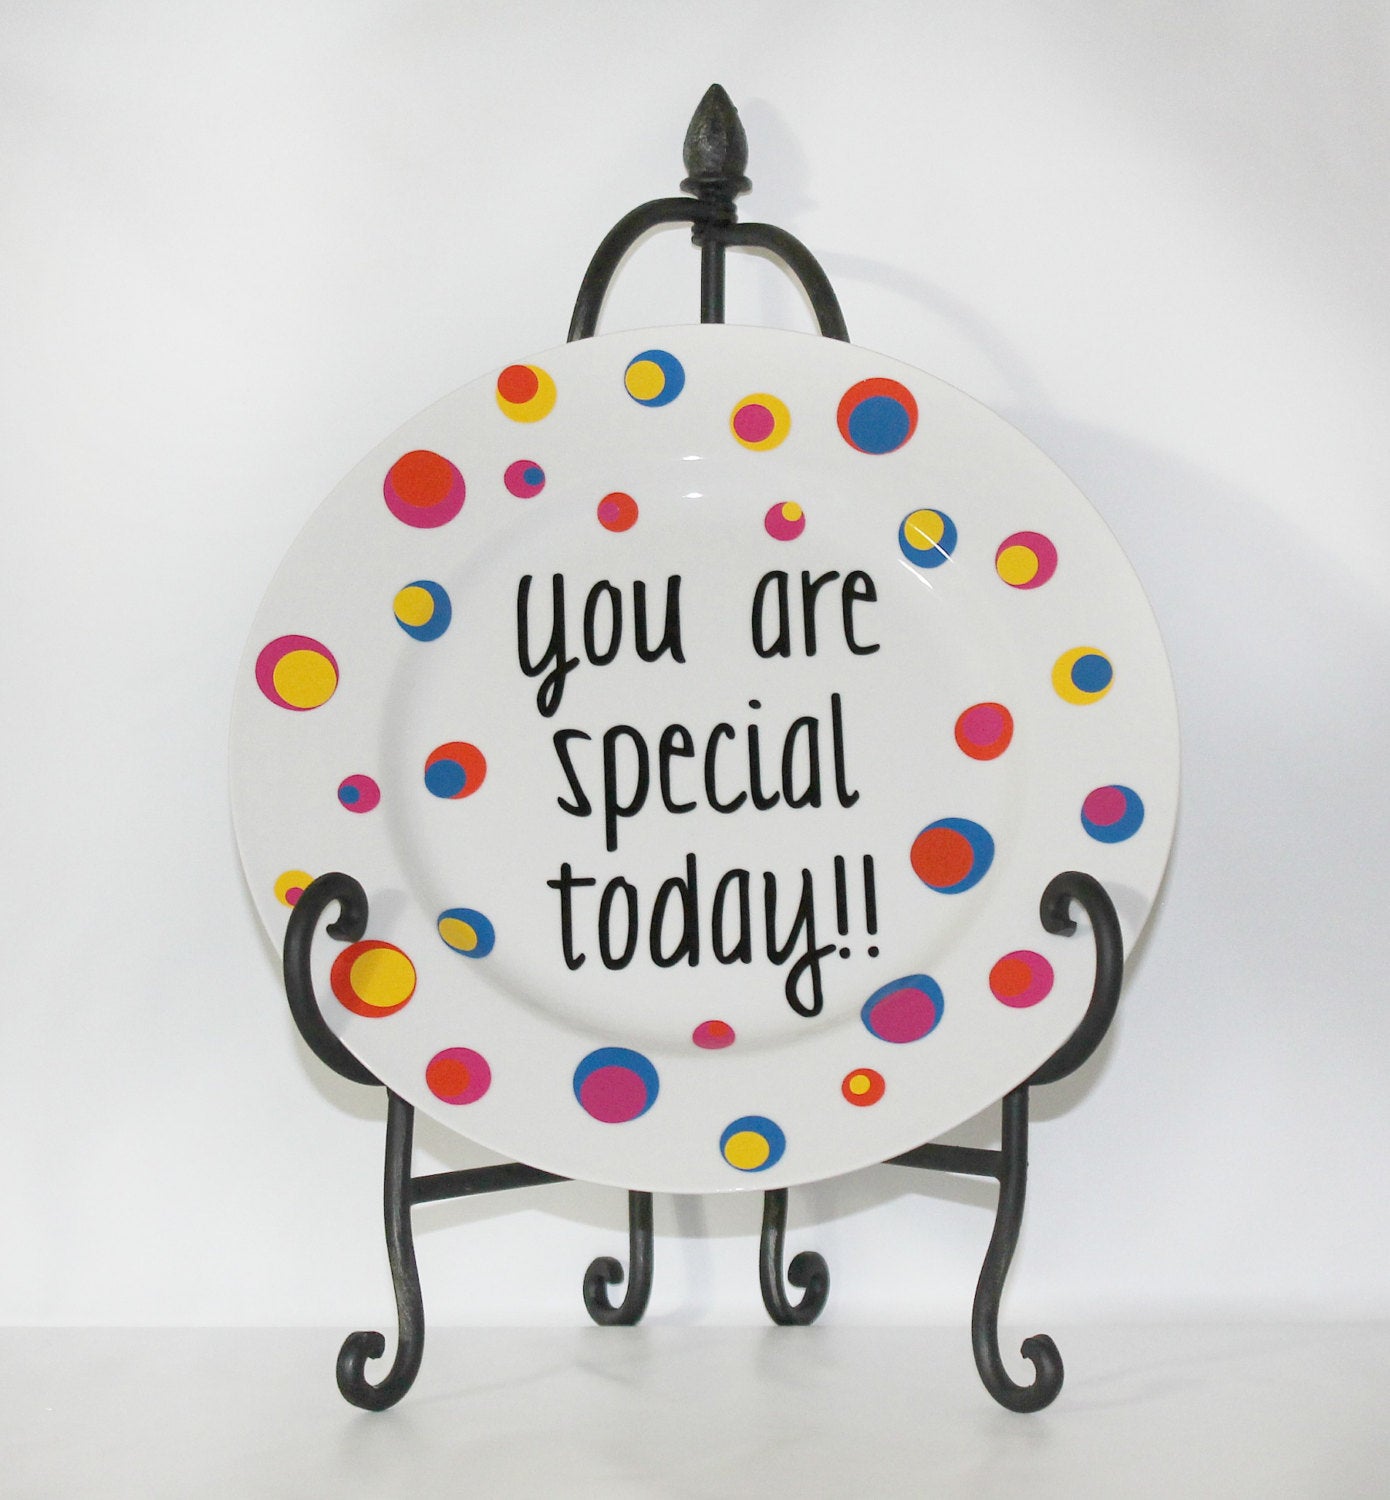 You are Special Today!" White Dinner Plate - Gift - Wedding - Engagement - Anniversary - Personalized - Vinyl - Porcelain